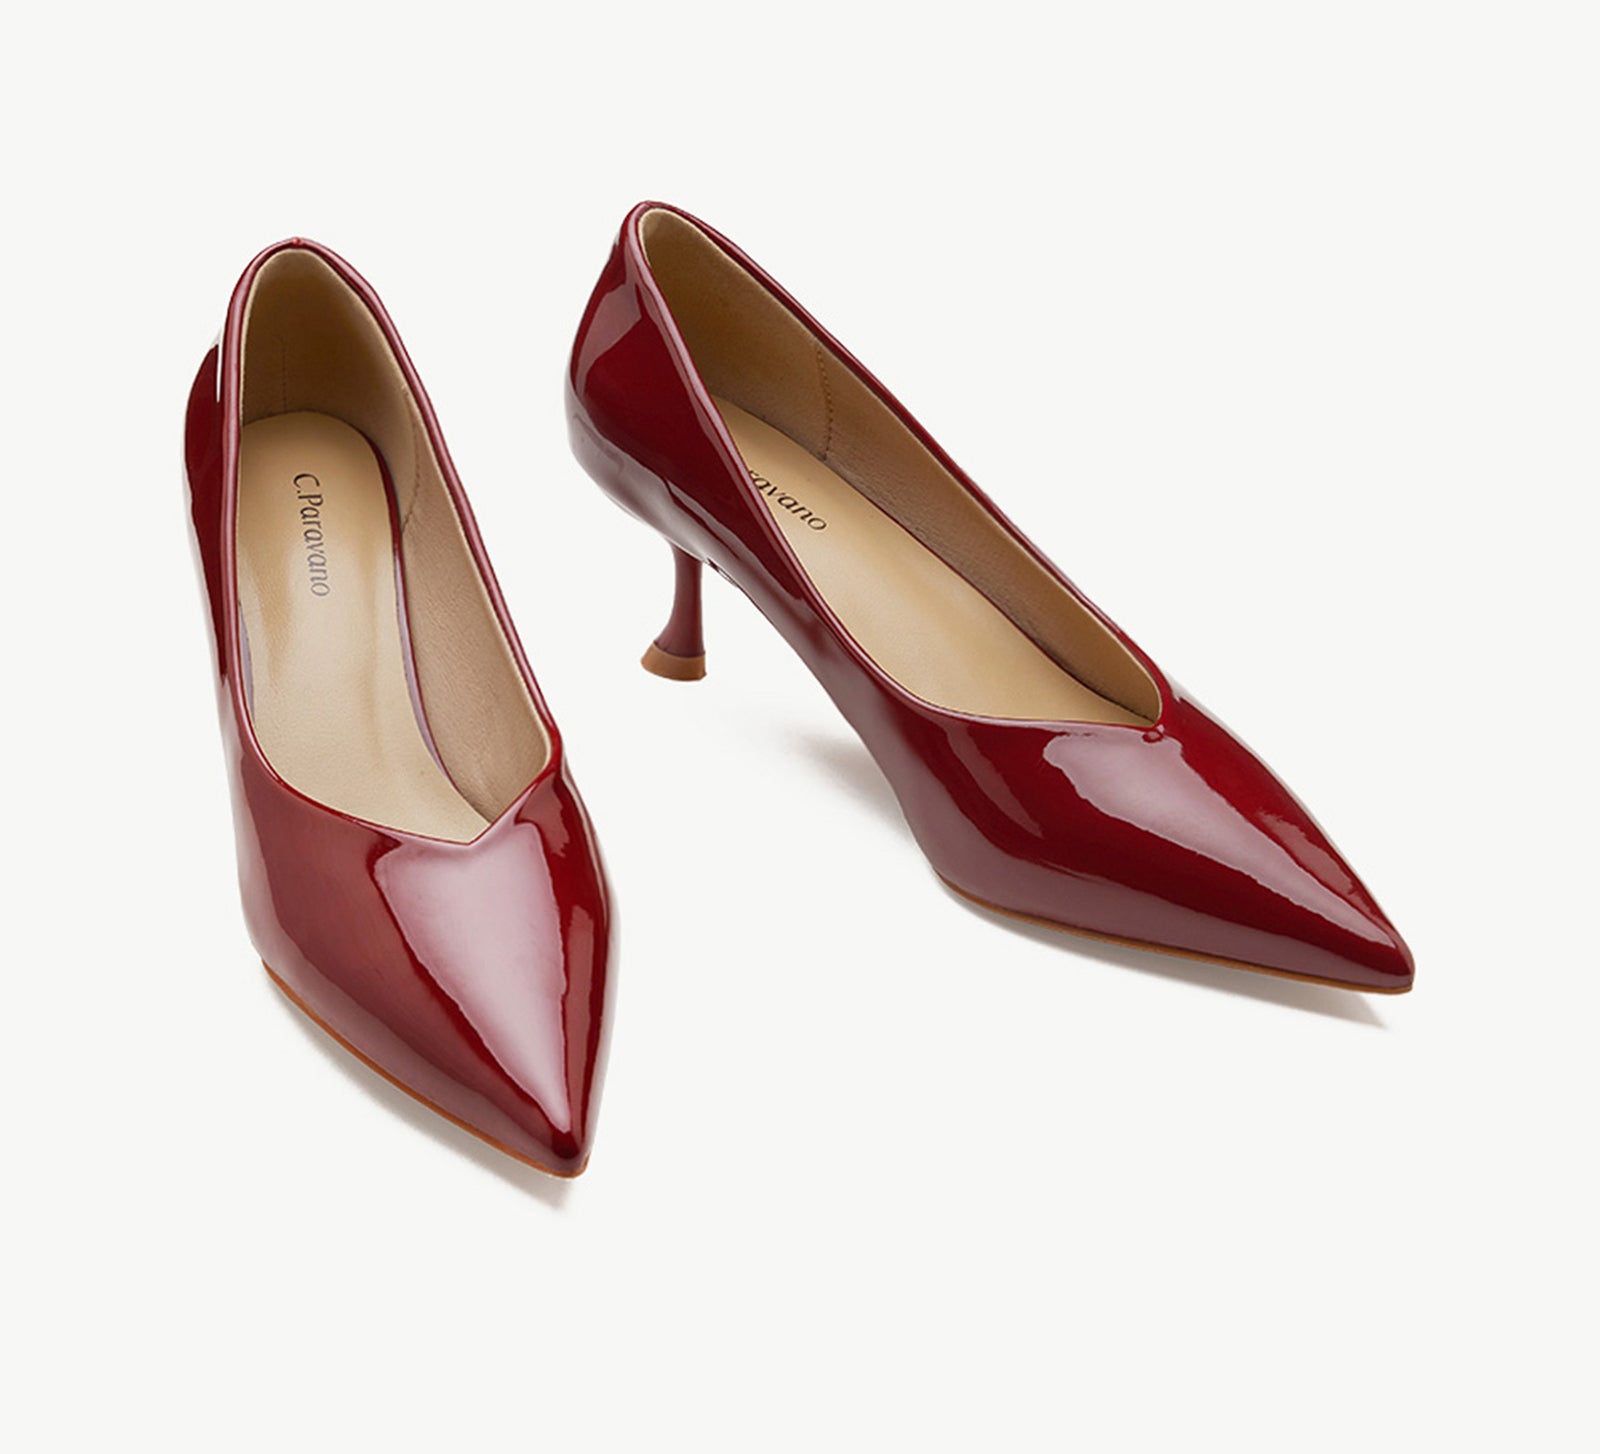 Glossed Patent Leather Pumps